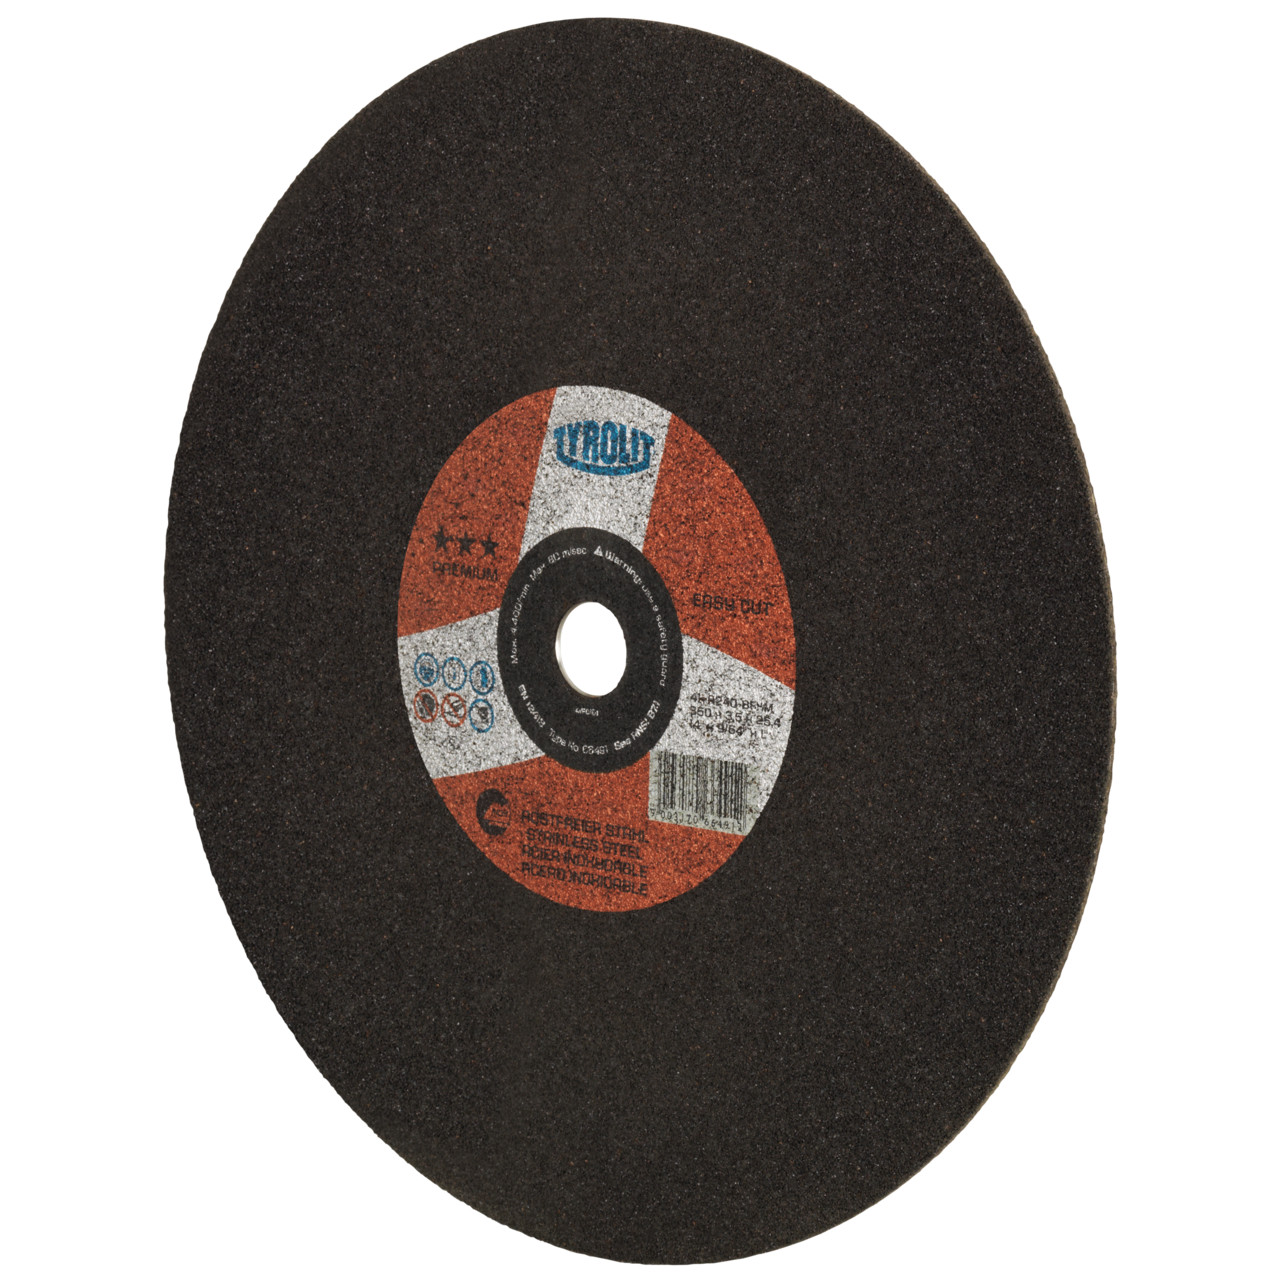 TYROLIT cut-off wheels DxDxH 500x5x40 For stainless steel, shape: 41 - straight version, Art. 460744